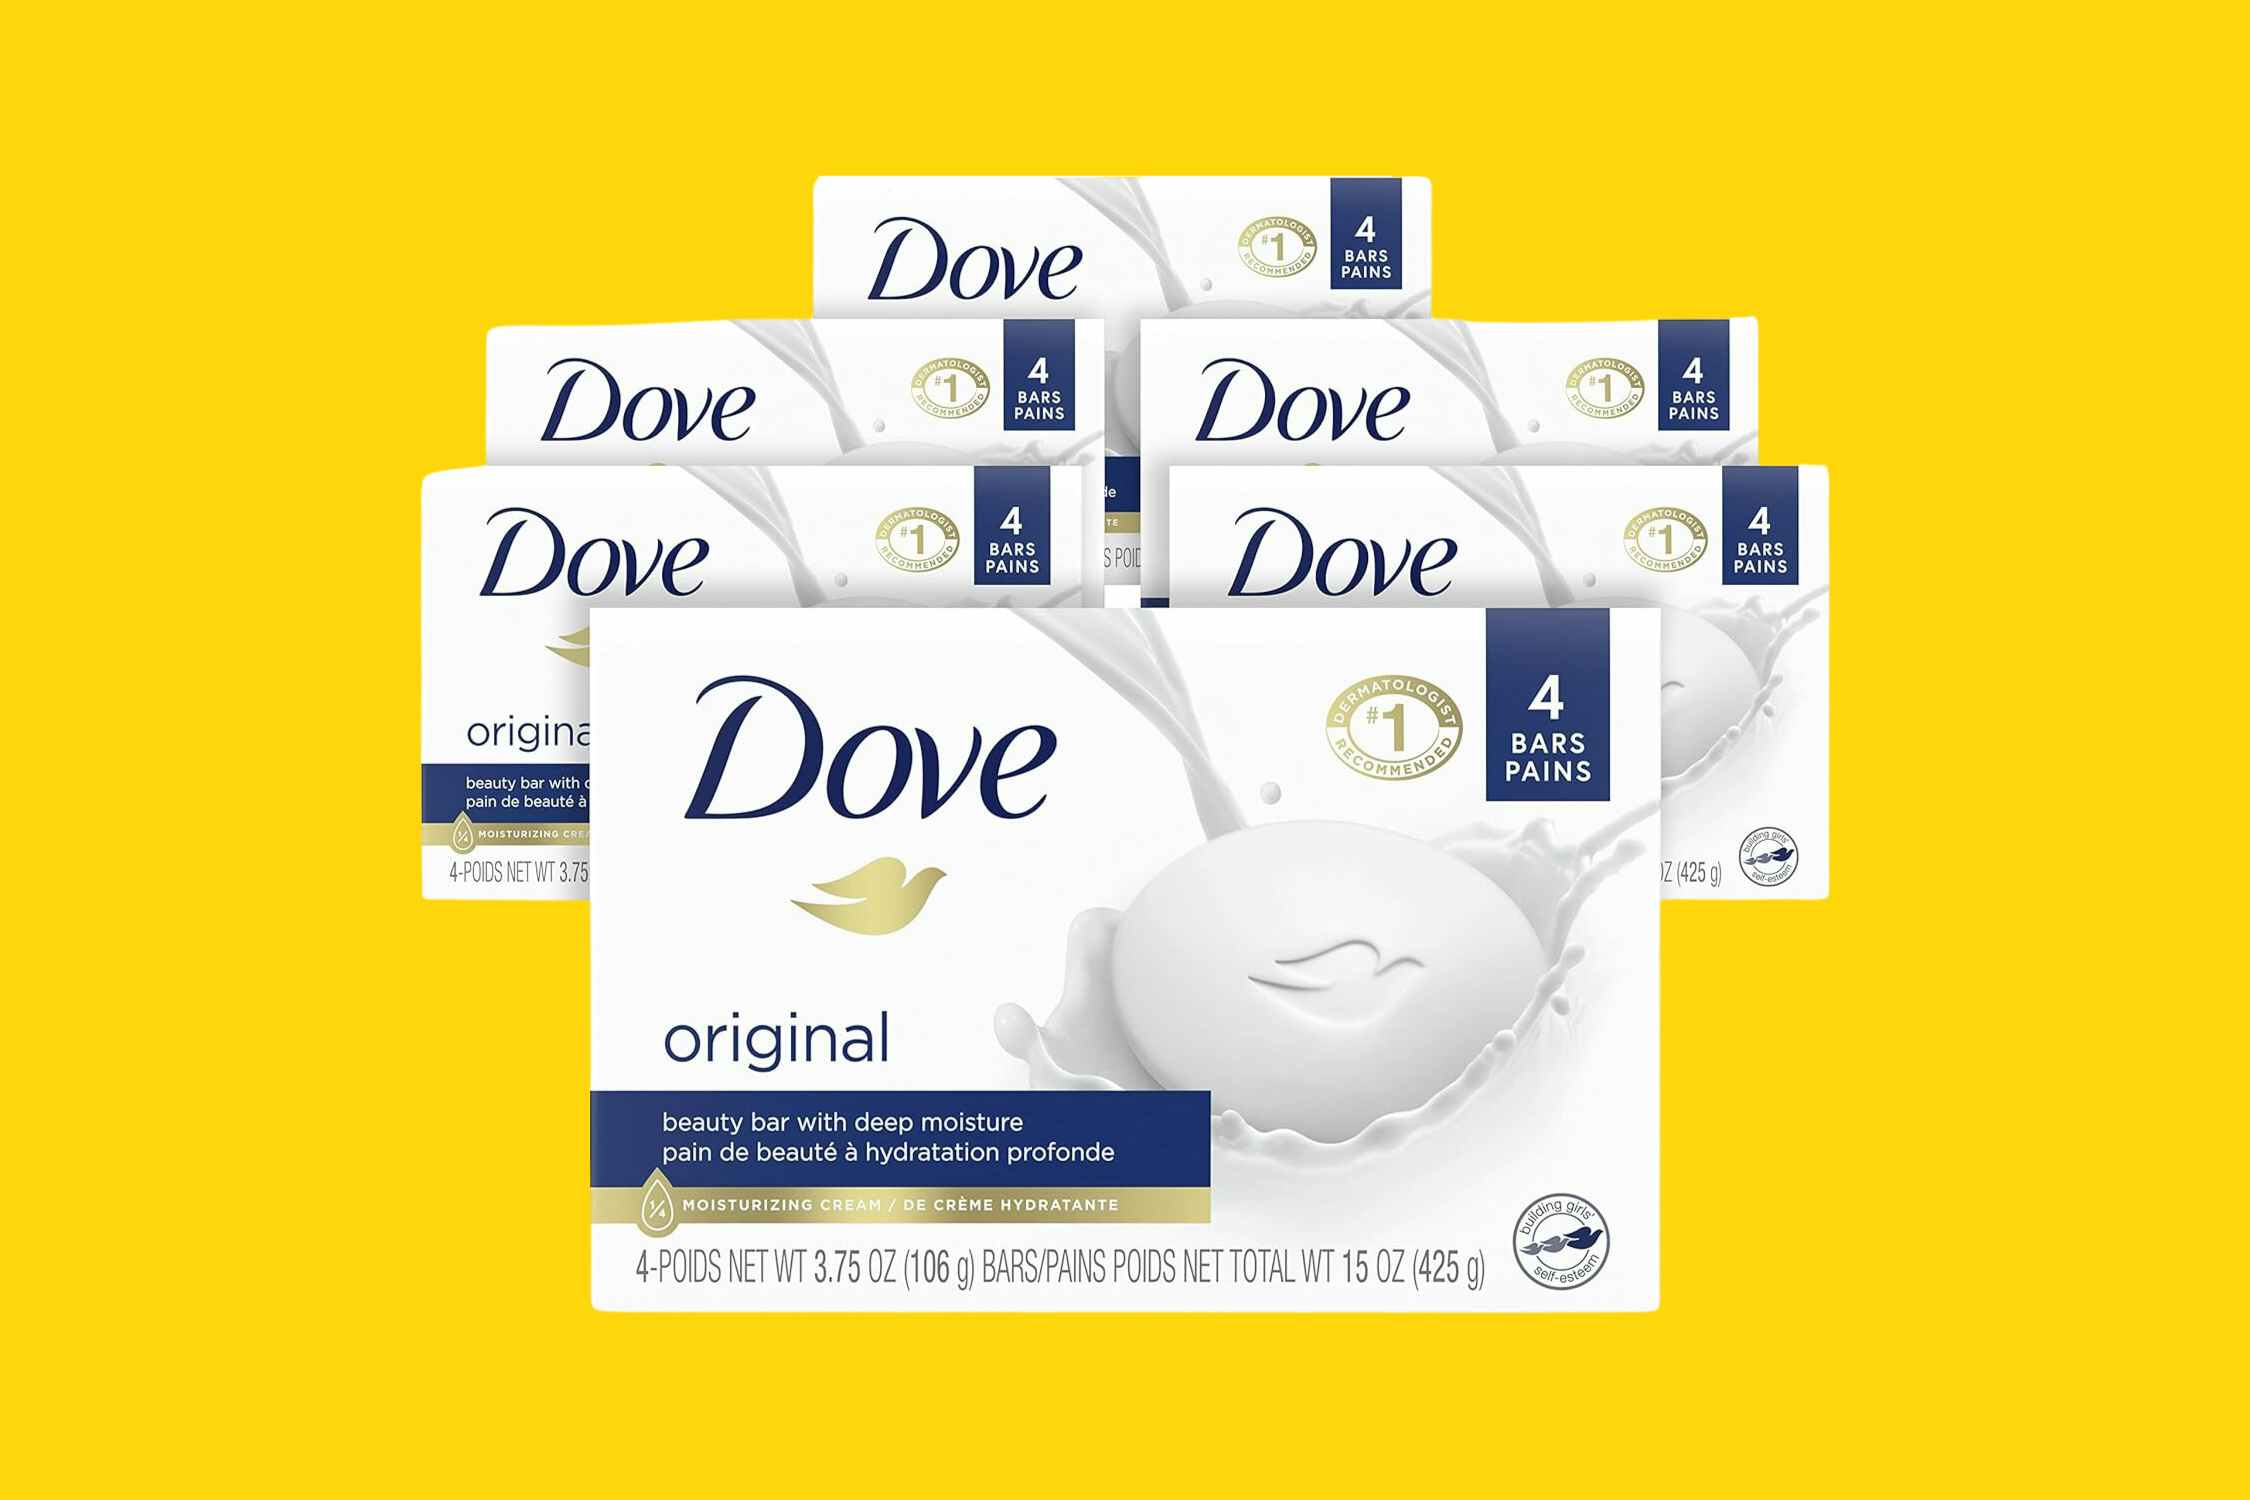 Dove Beauty Bars, as Low as $0.73 per Bar on Amazon